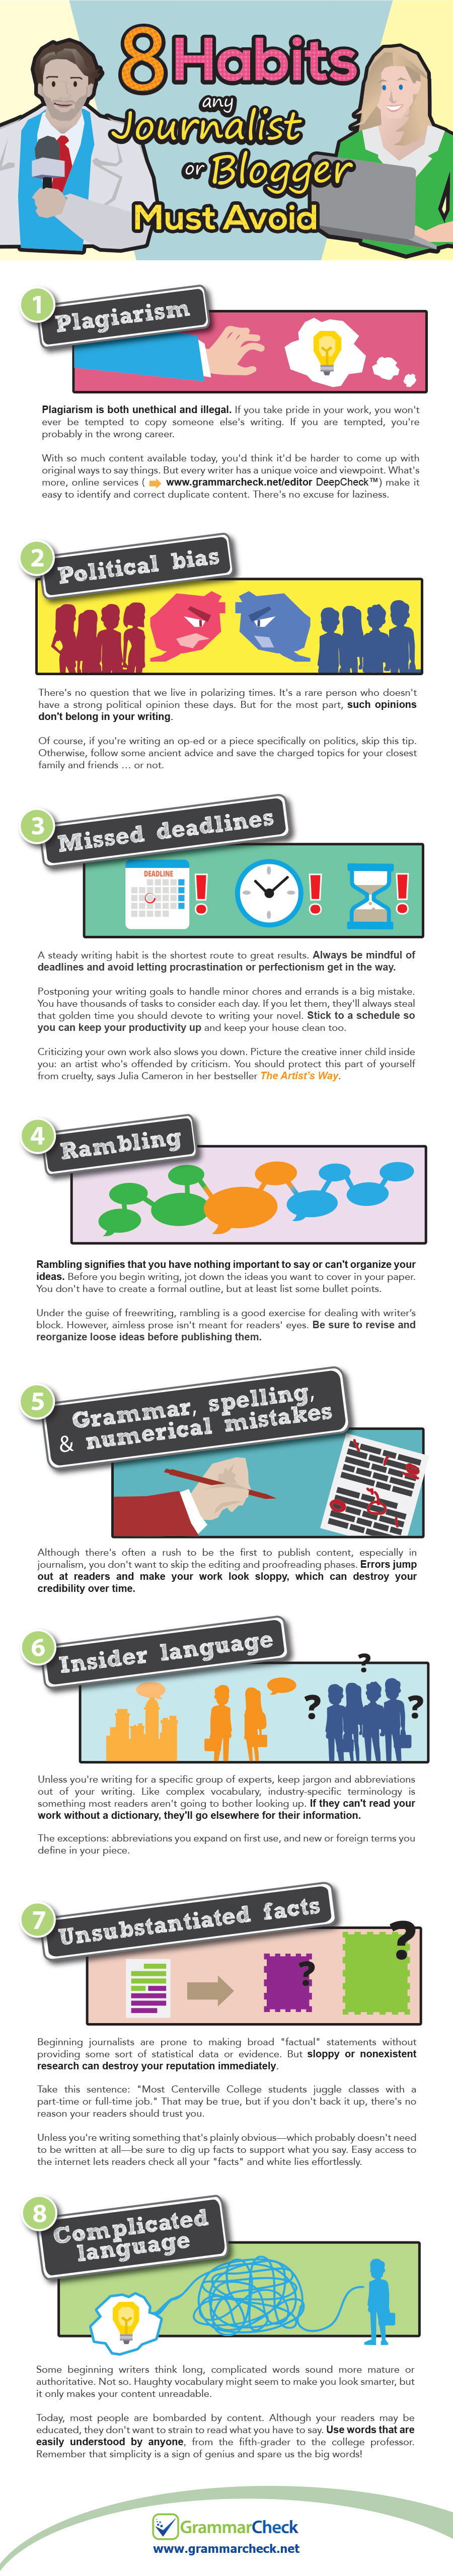 8 Habits Any Journalist or Blogger Must Avoid by GrammarCheck